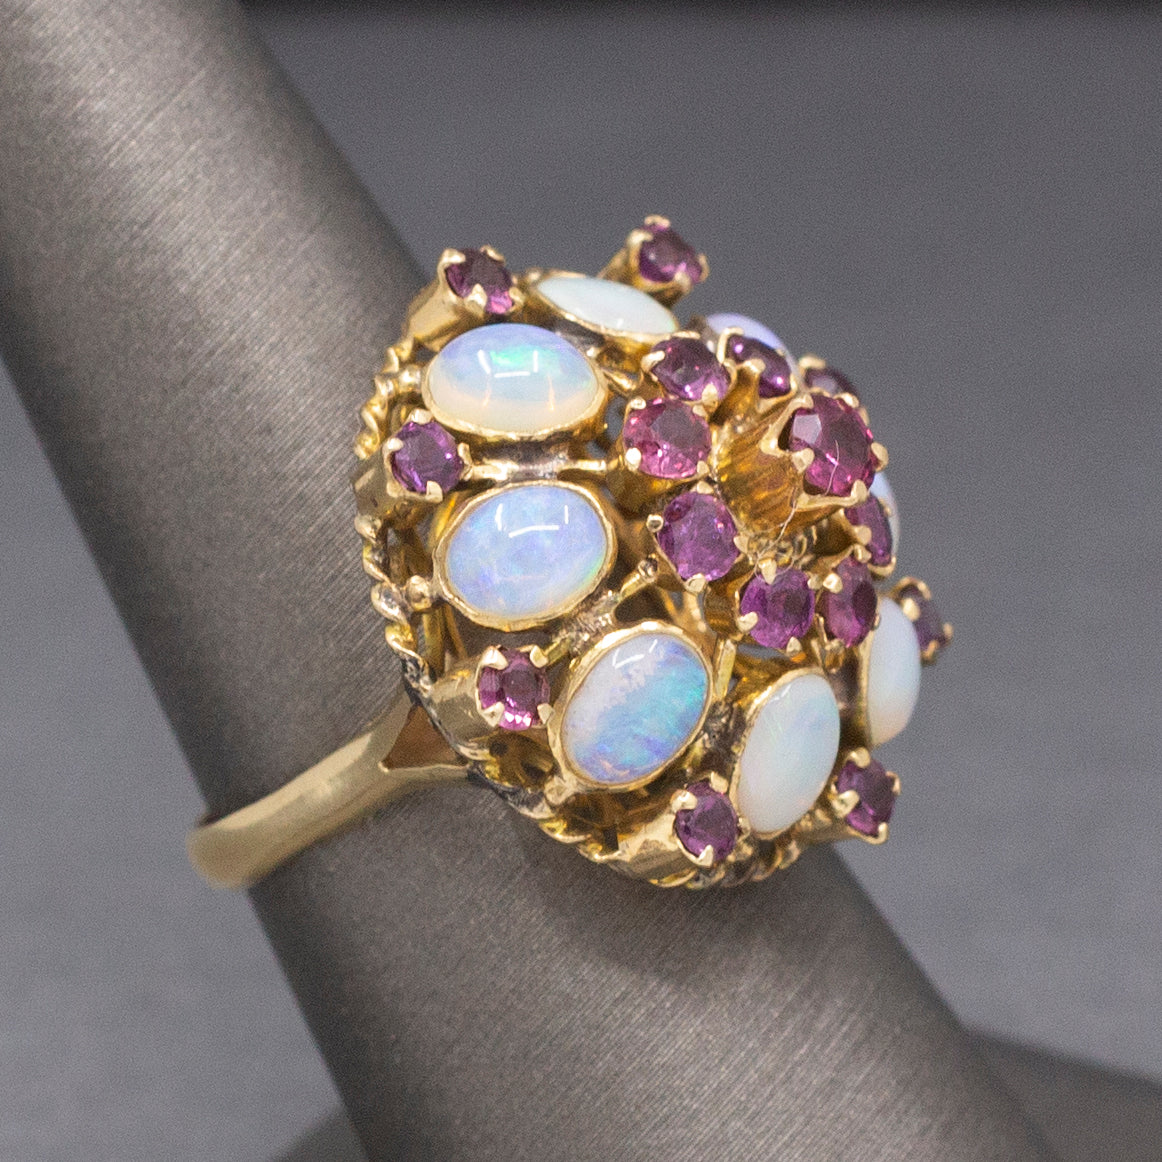 Fantastic Ruby and Opal Harem Princess Cake Ring in 12k Yellow Gold